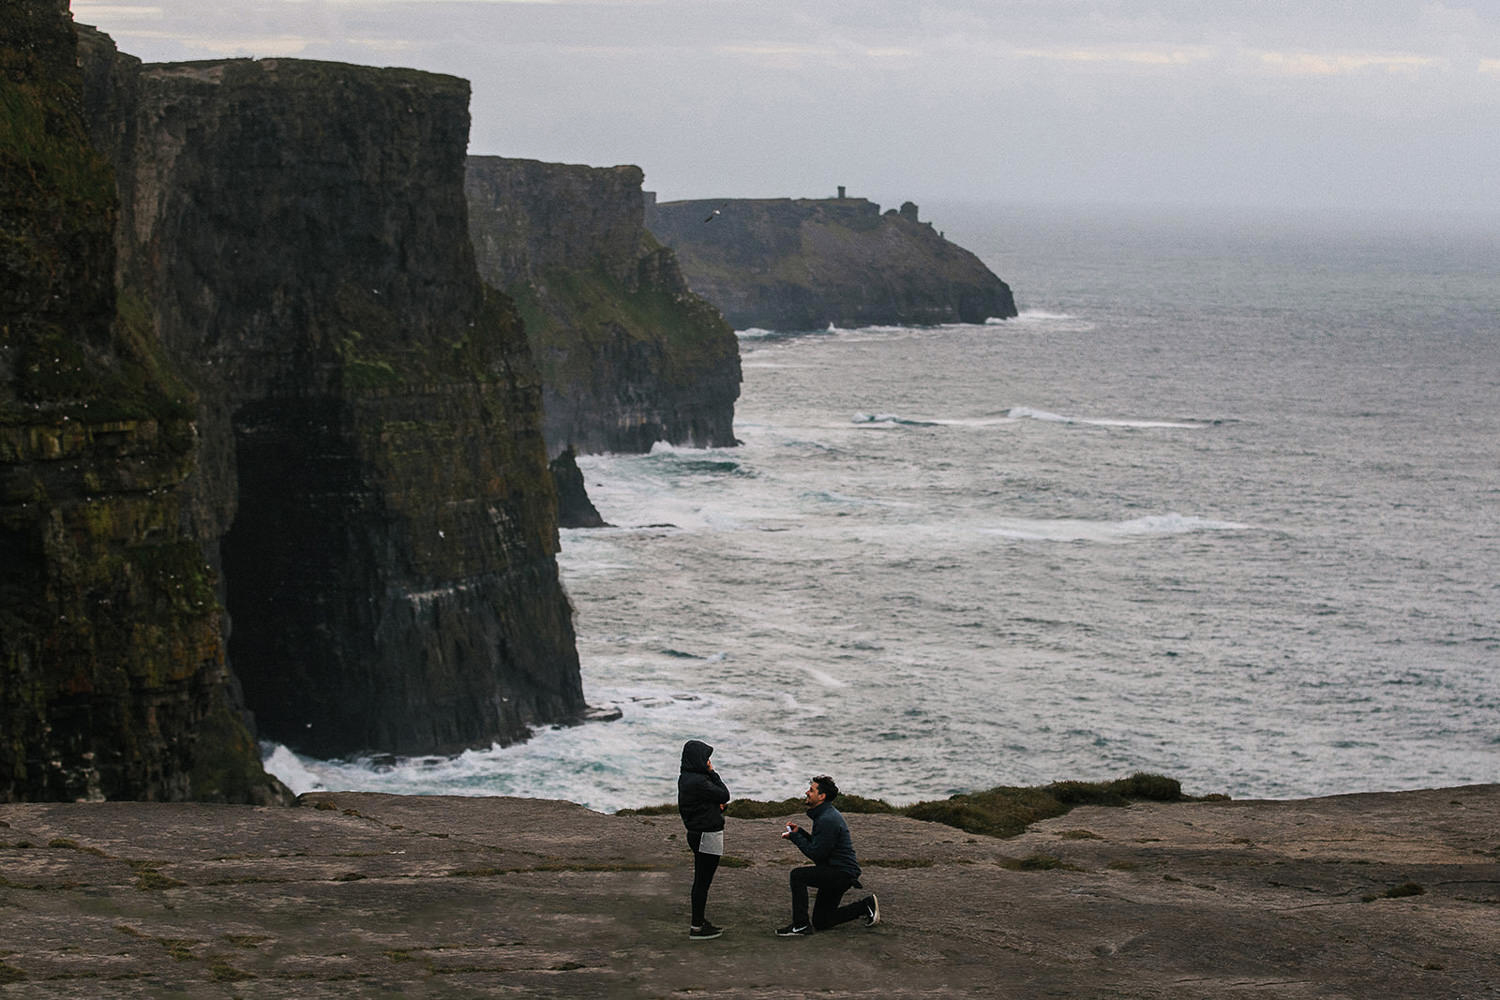 Cliffs-of-moher-proposal-ME-1 Cliffs of Moher Proposal  // Michael & Emmaly